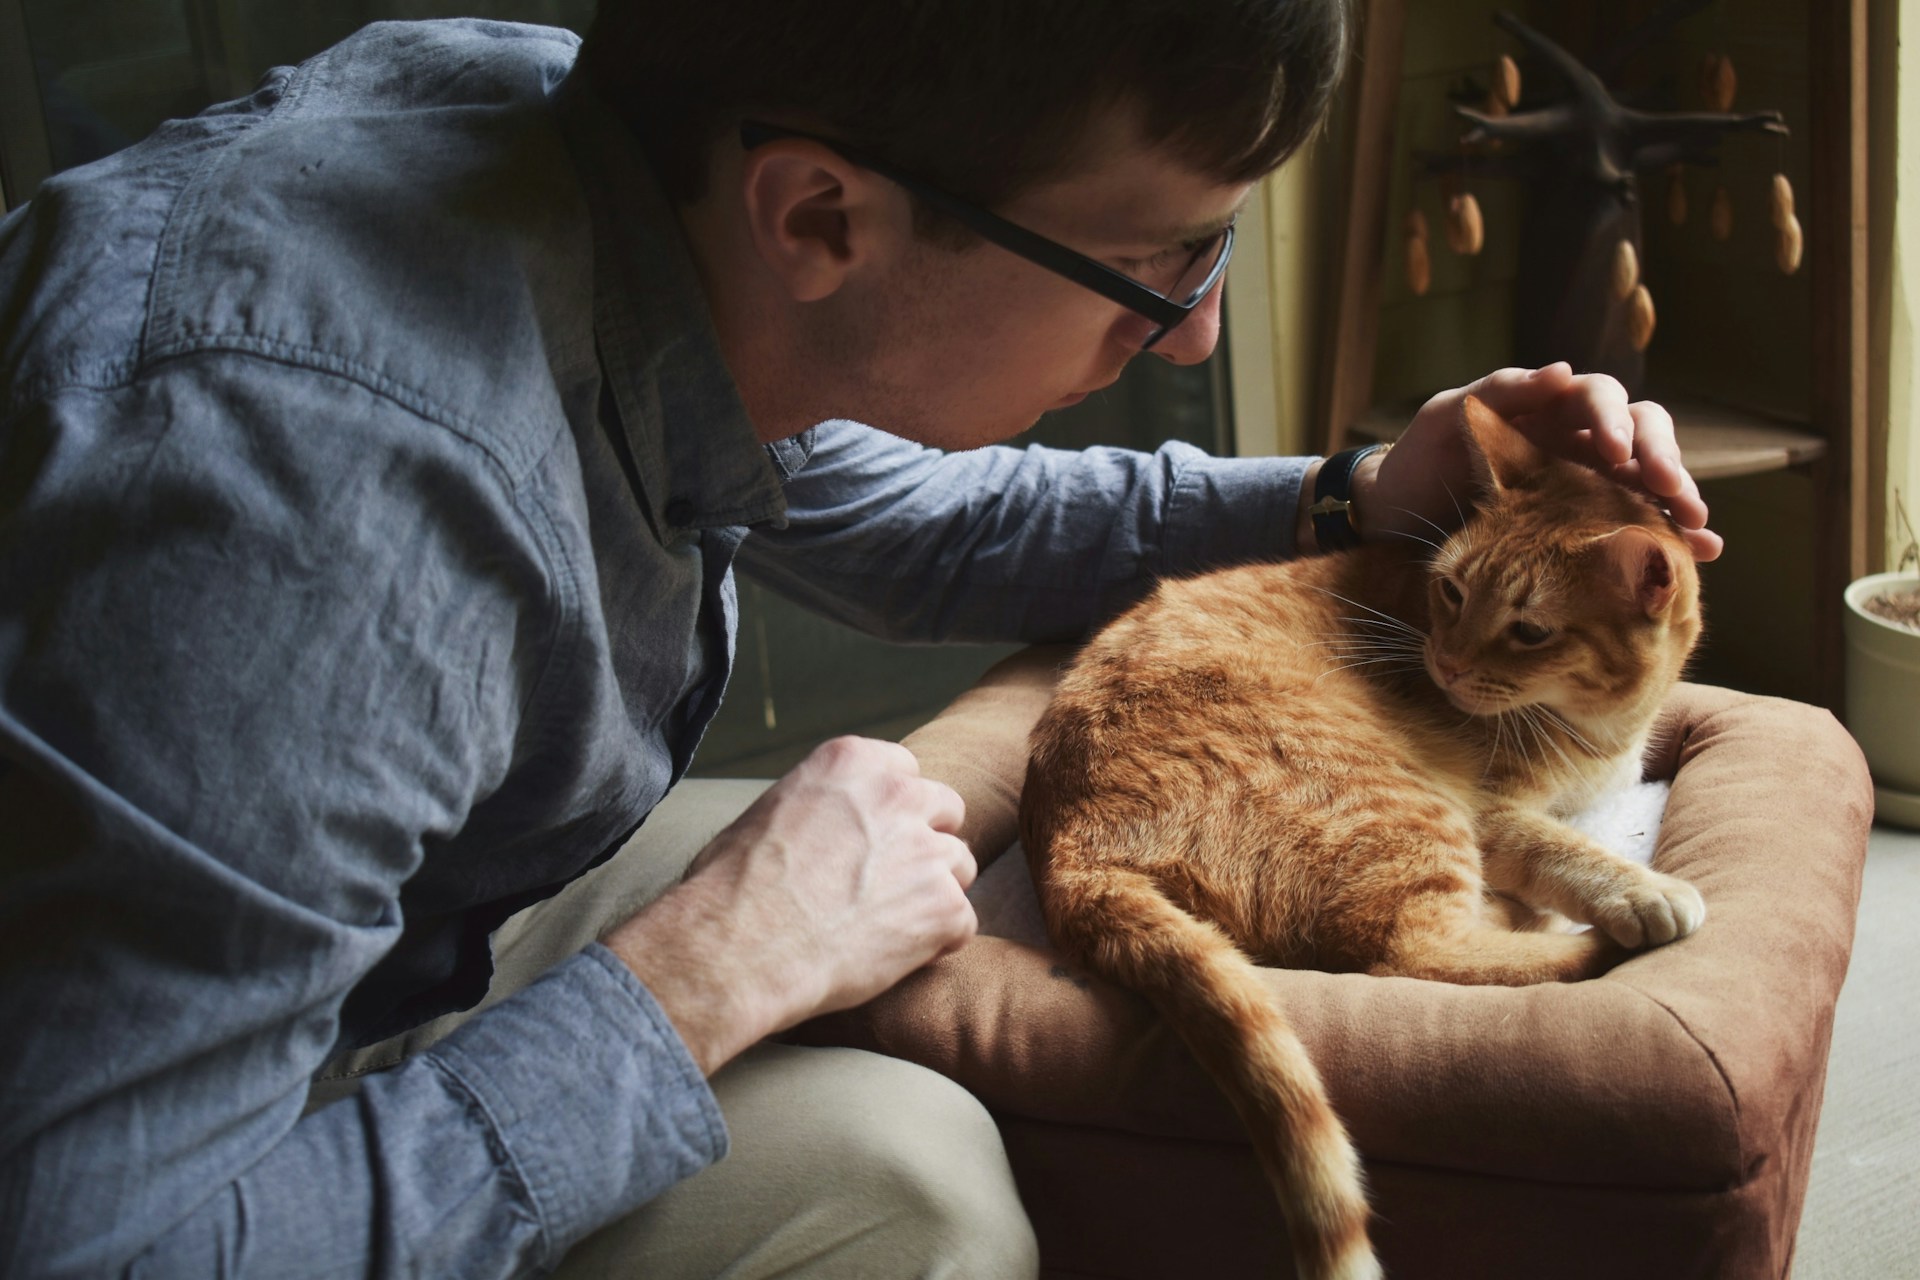 man petting his orange cat curled up on bed